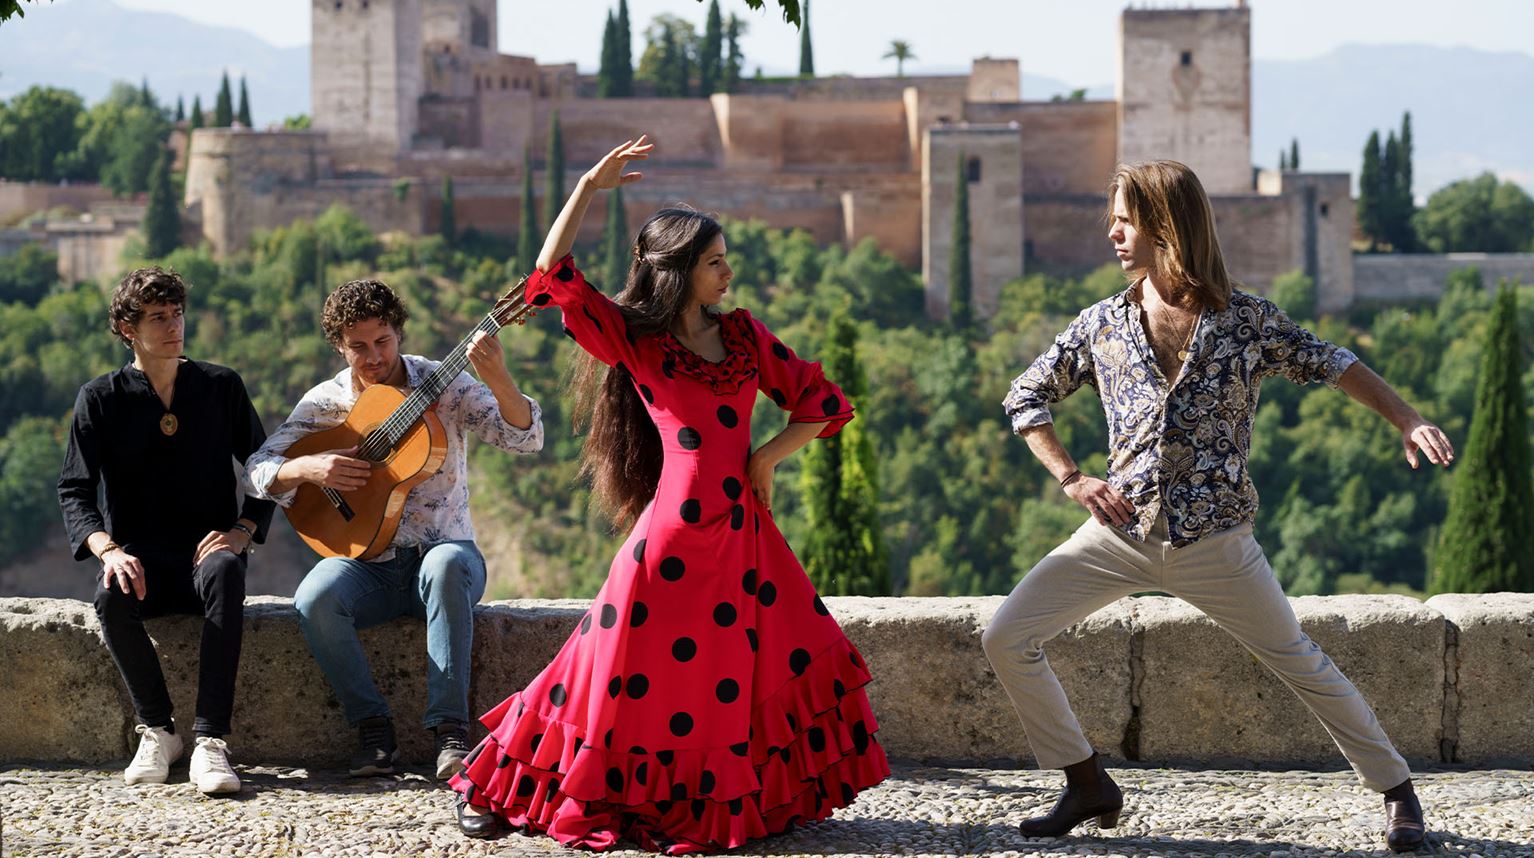 Flamenco dancers and musicians performing outdoors.